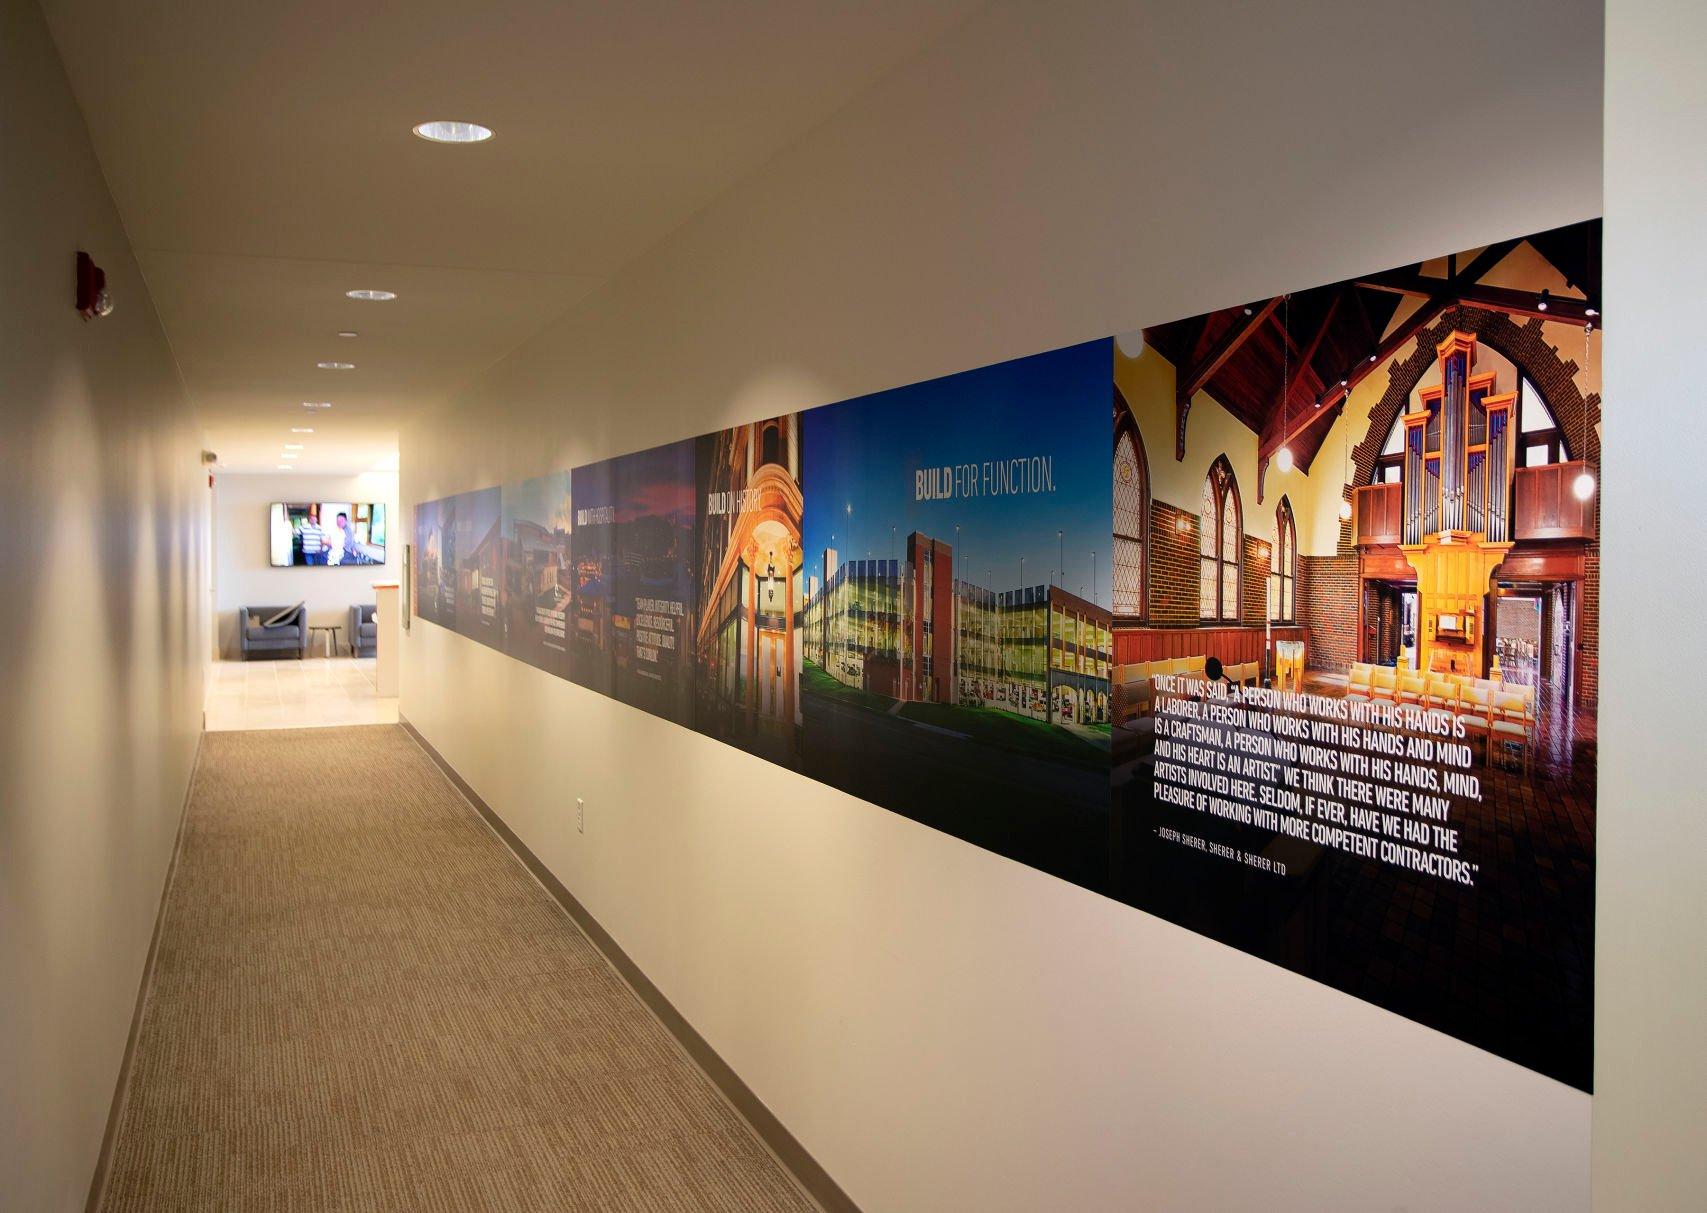 A hallway showcasing some past projects at Conlon Construction’s new corporate offices in Dubuque. The company began in 1903 in Cuba City, Wis. It moved to Dubuque in 1922 and has continued family ownership the entire time.    PHOTO CREDIT: Stephen Gassman